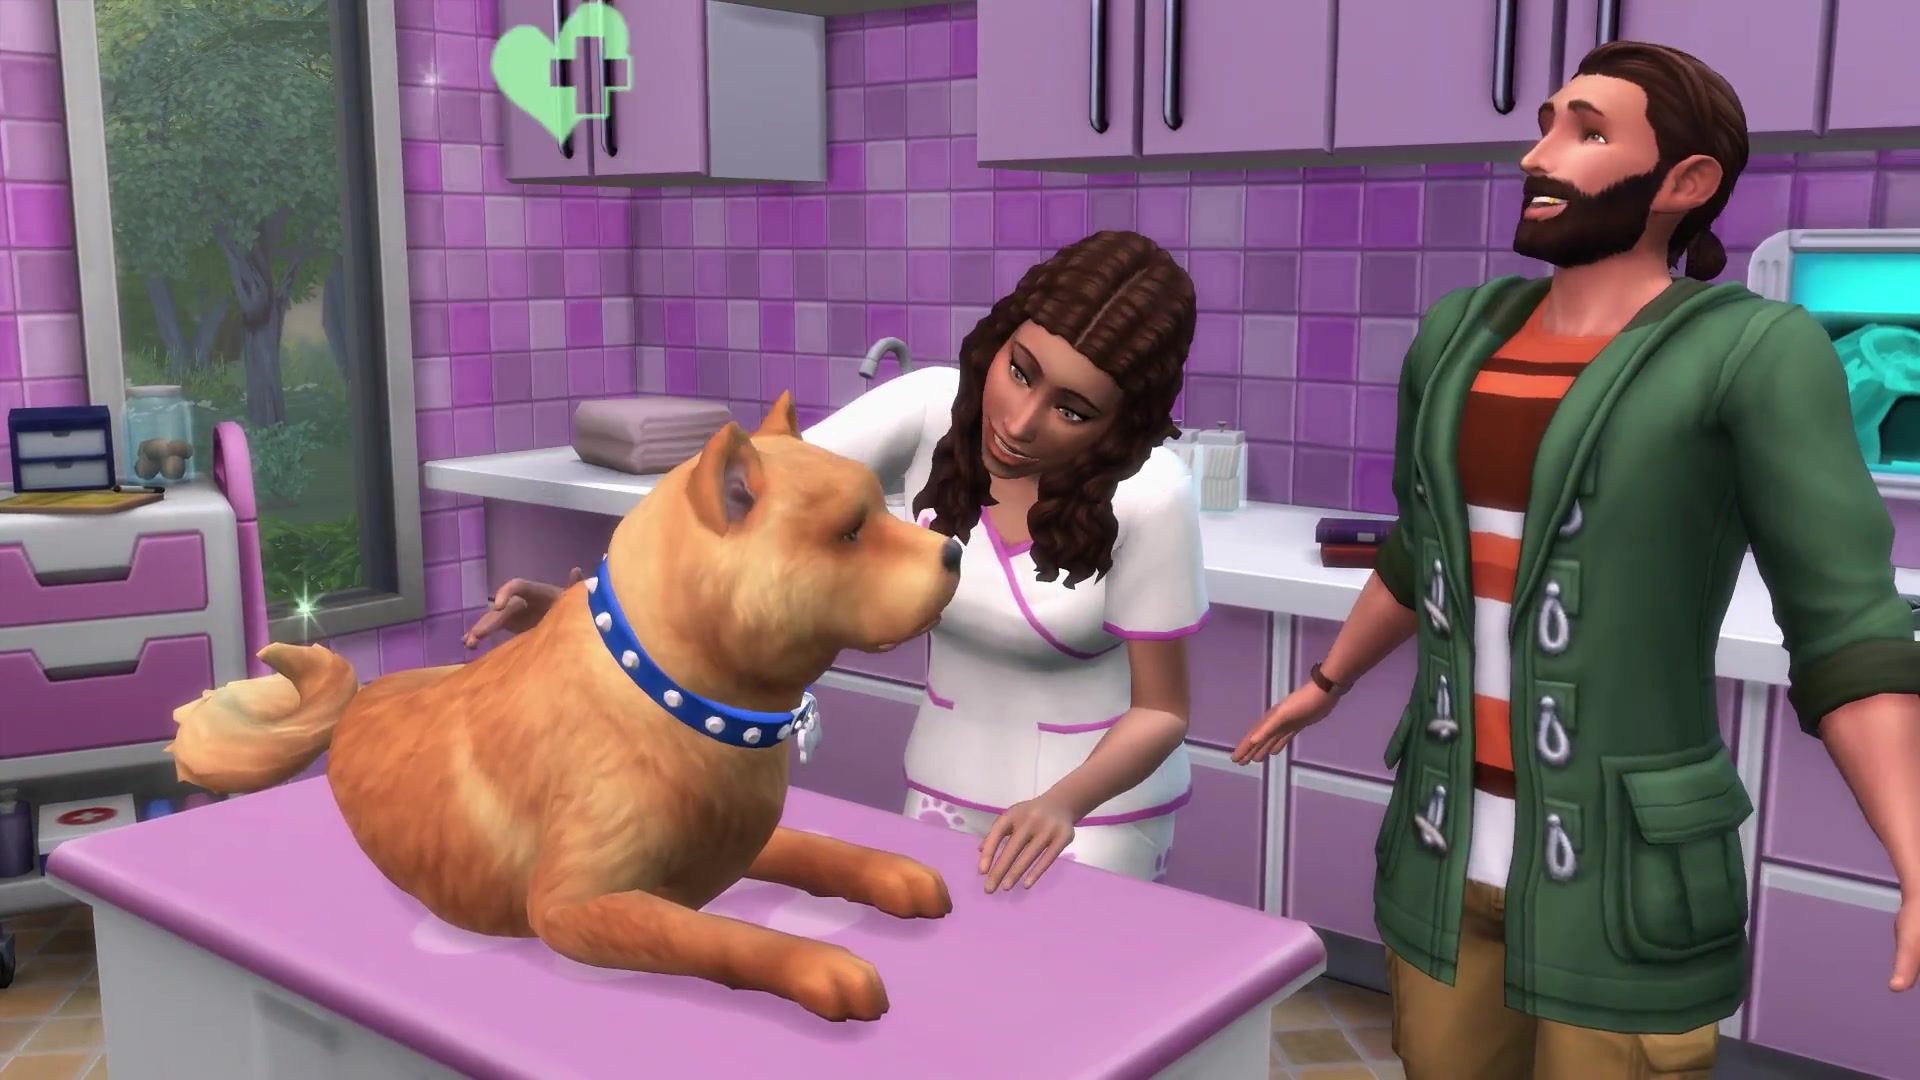 sims 4 cats and dogs pc download free